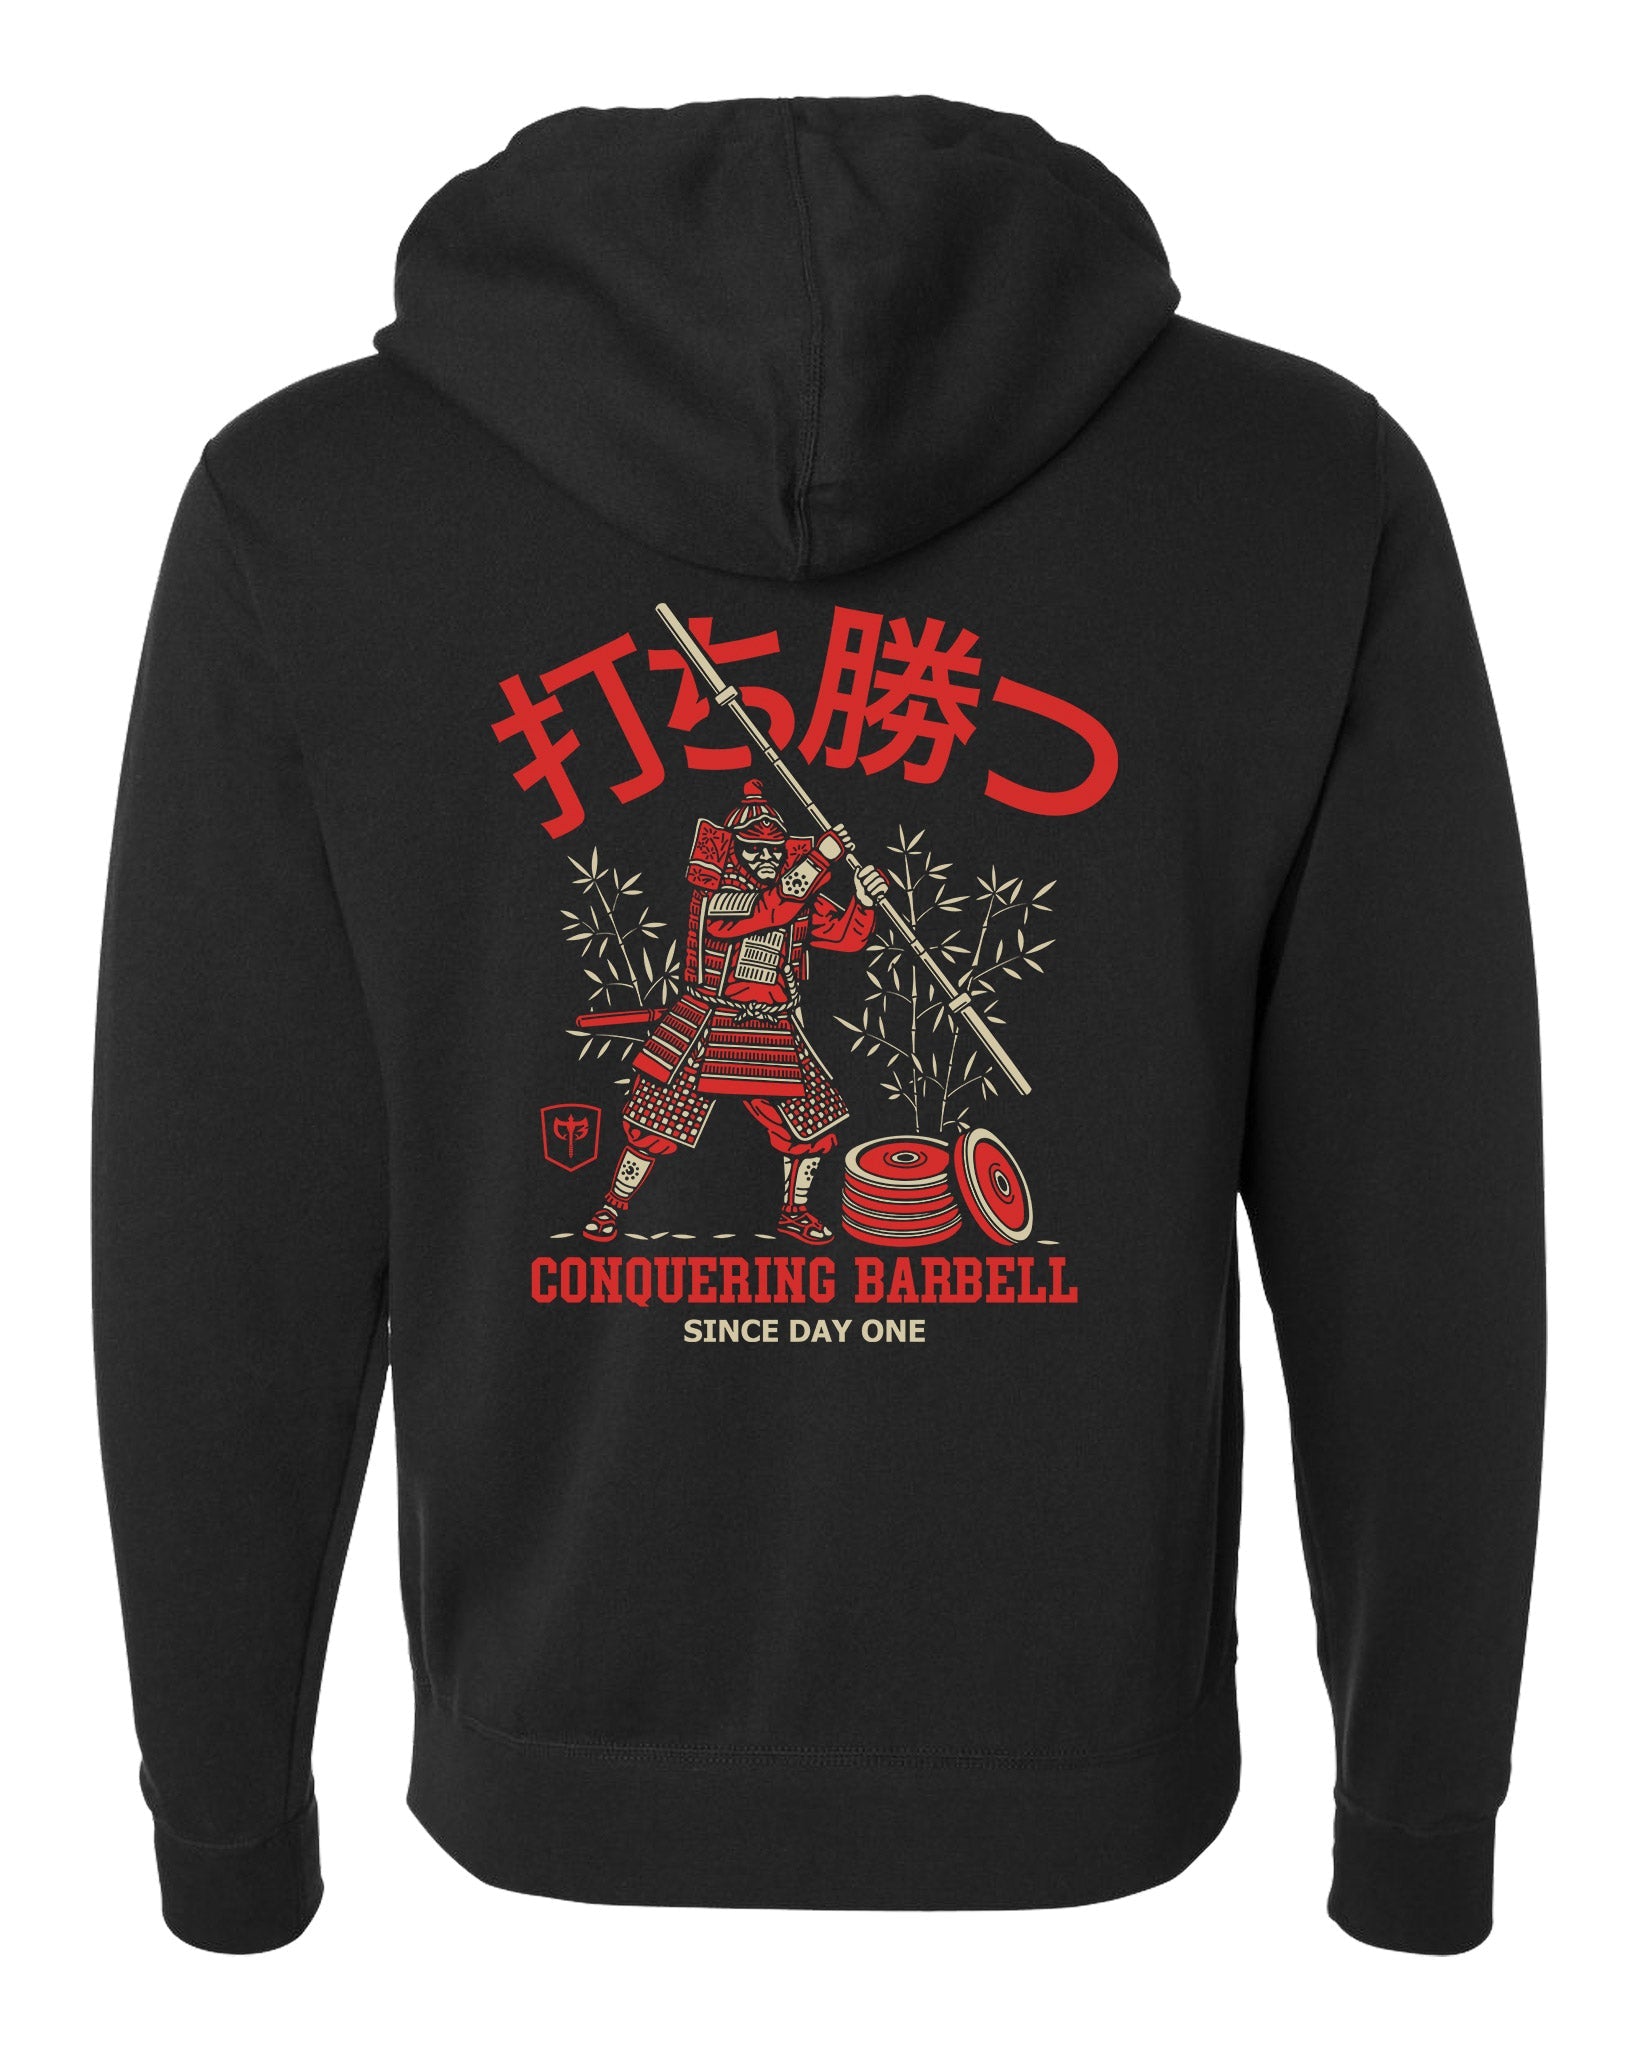 Conquer - Way of the Samurai - on Black Pullover Hoodie